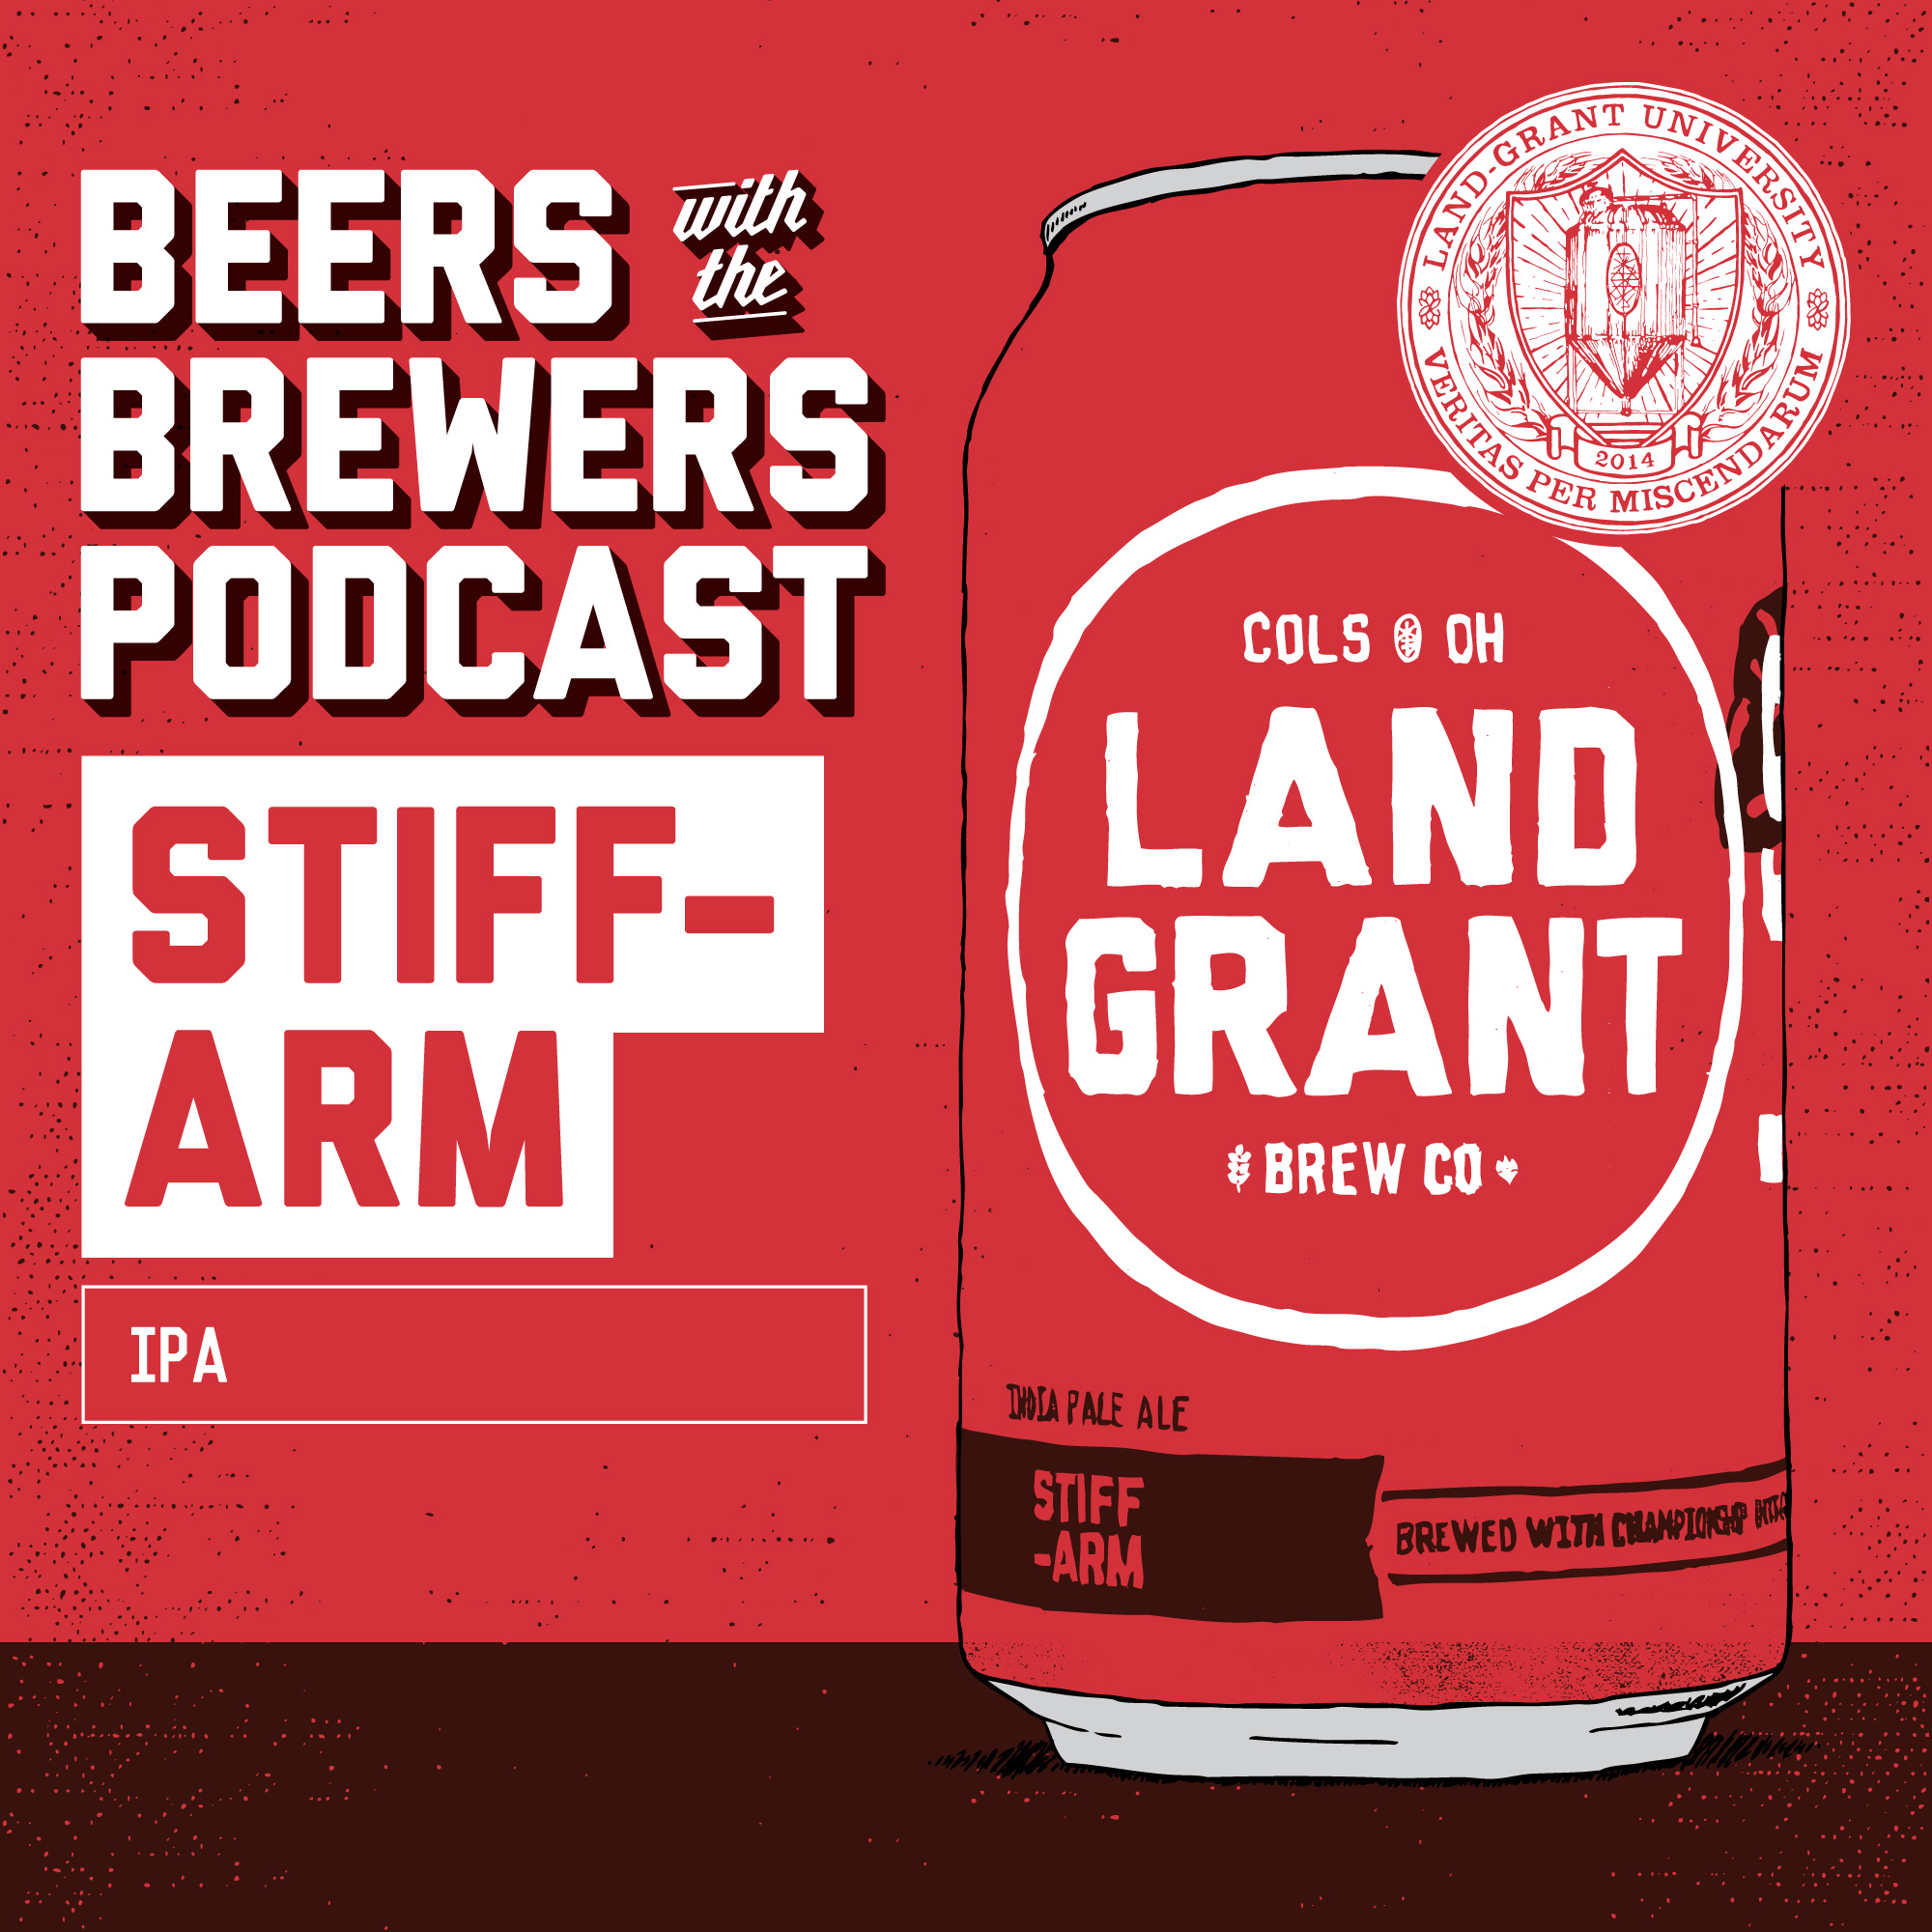 Stiff-Arm - IPA - Beers with the Brewers